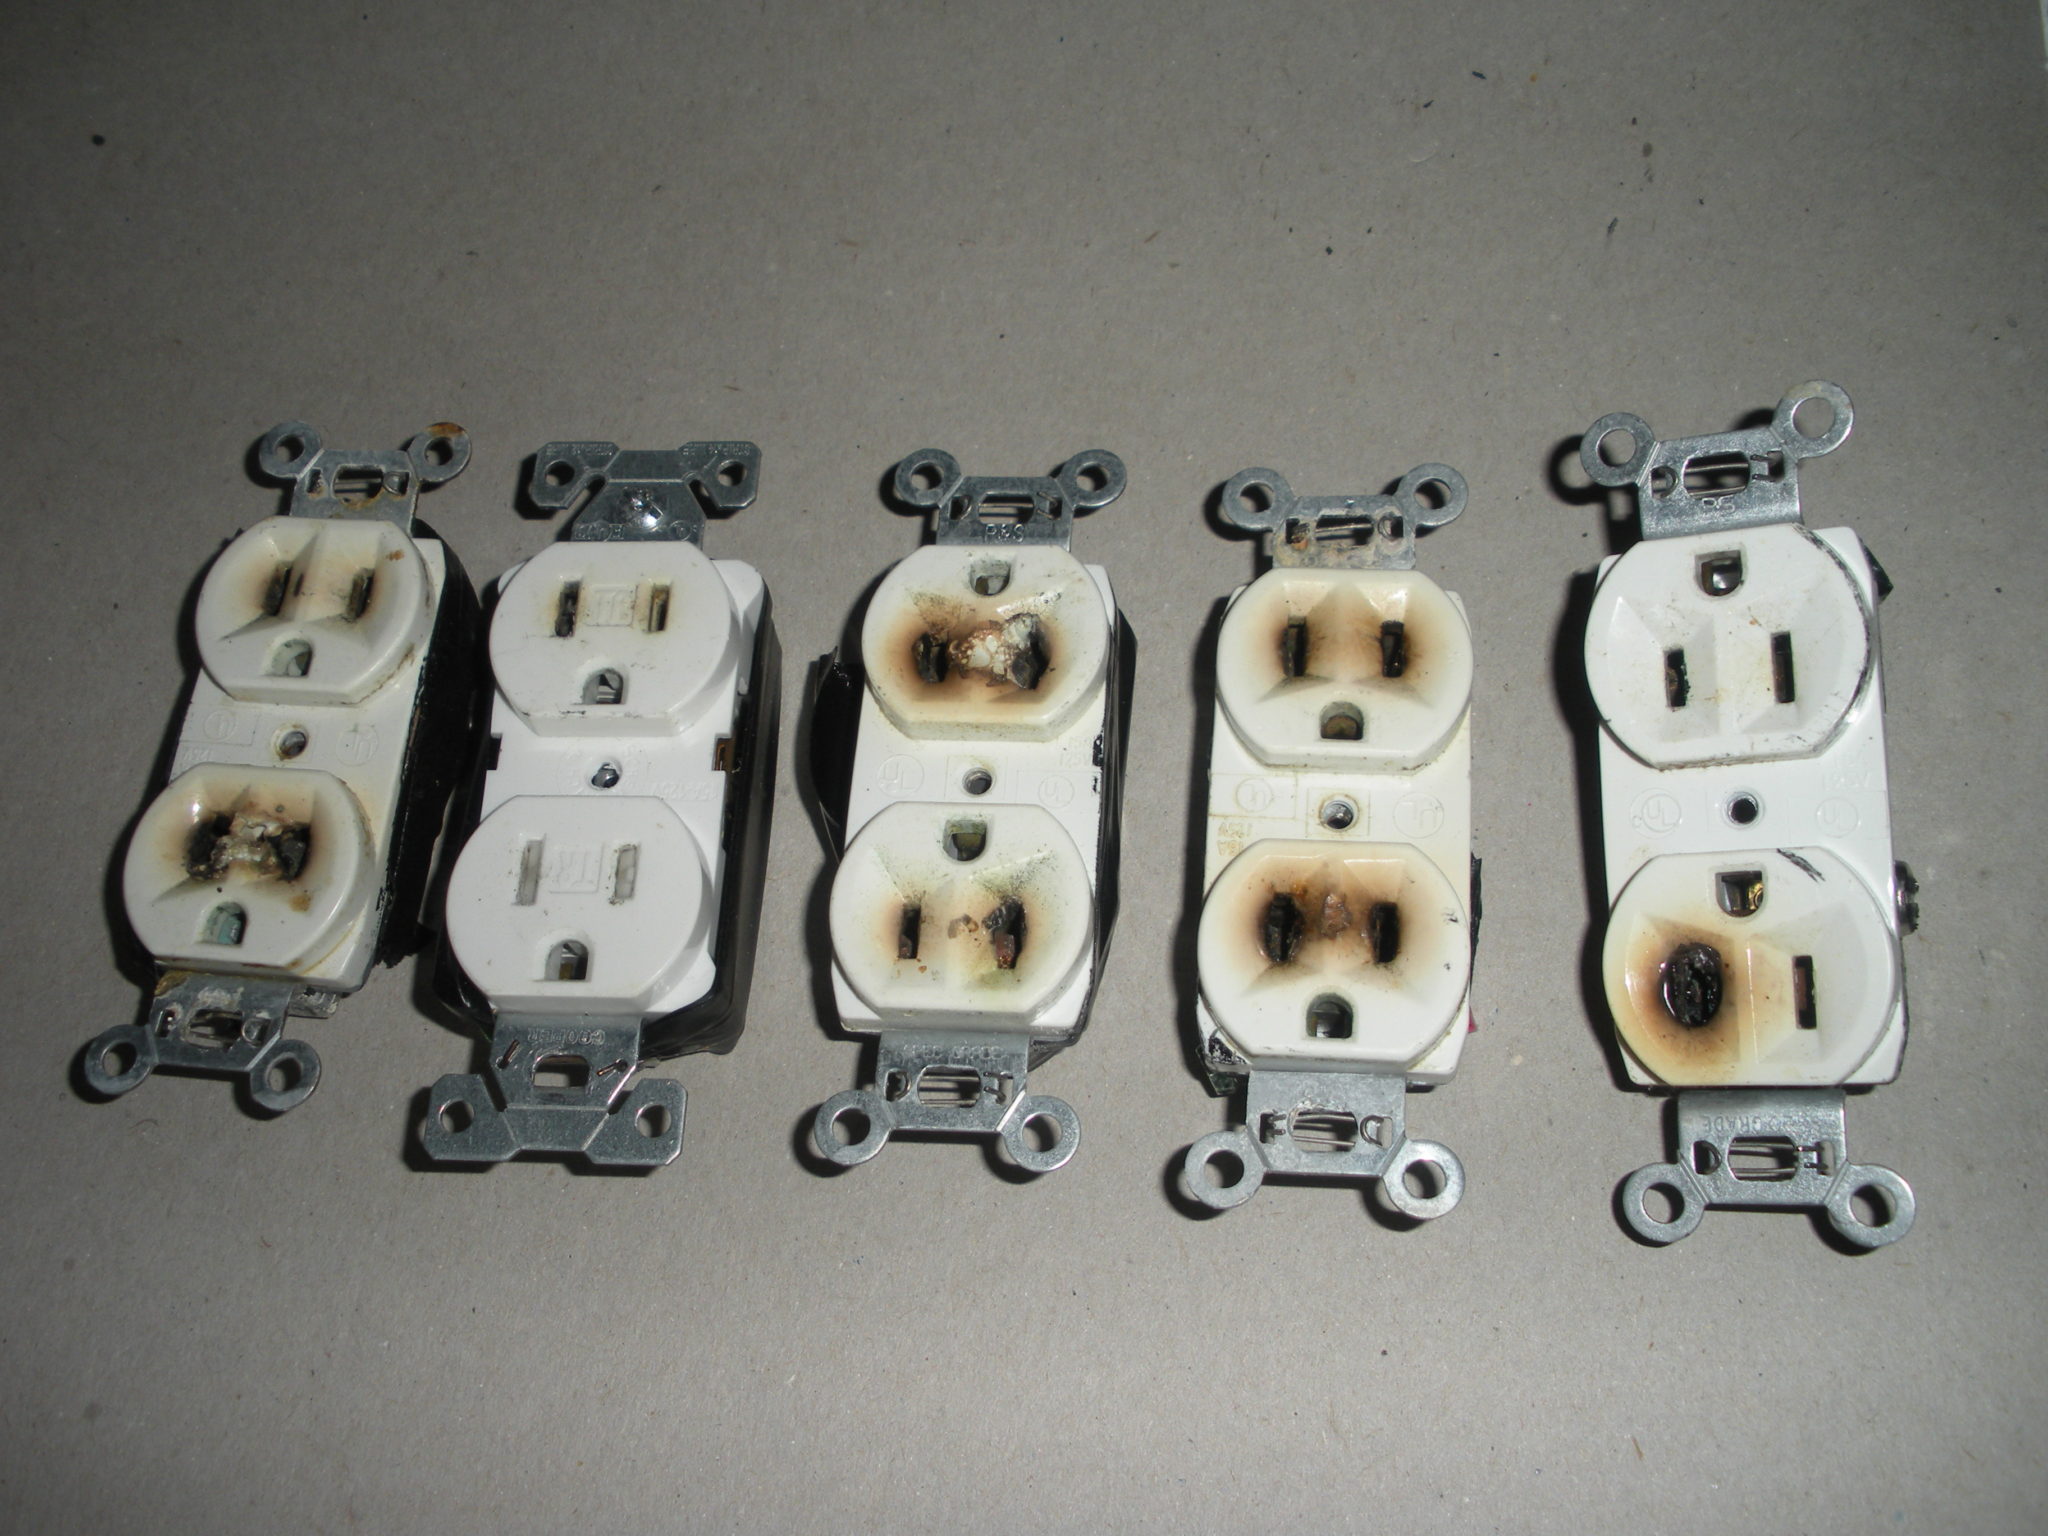 Chicago Electrician Burnt Receptacles